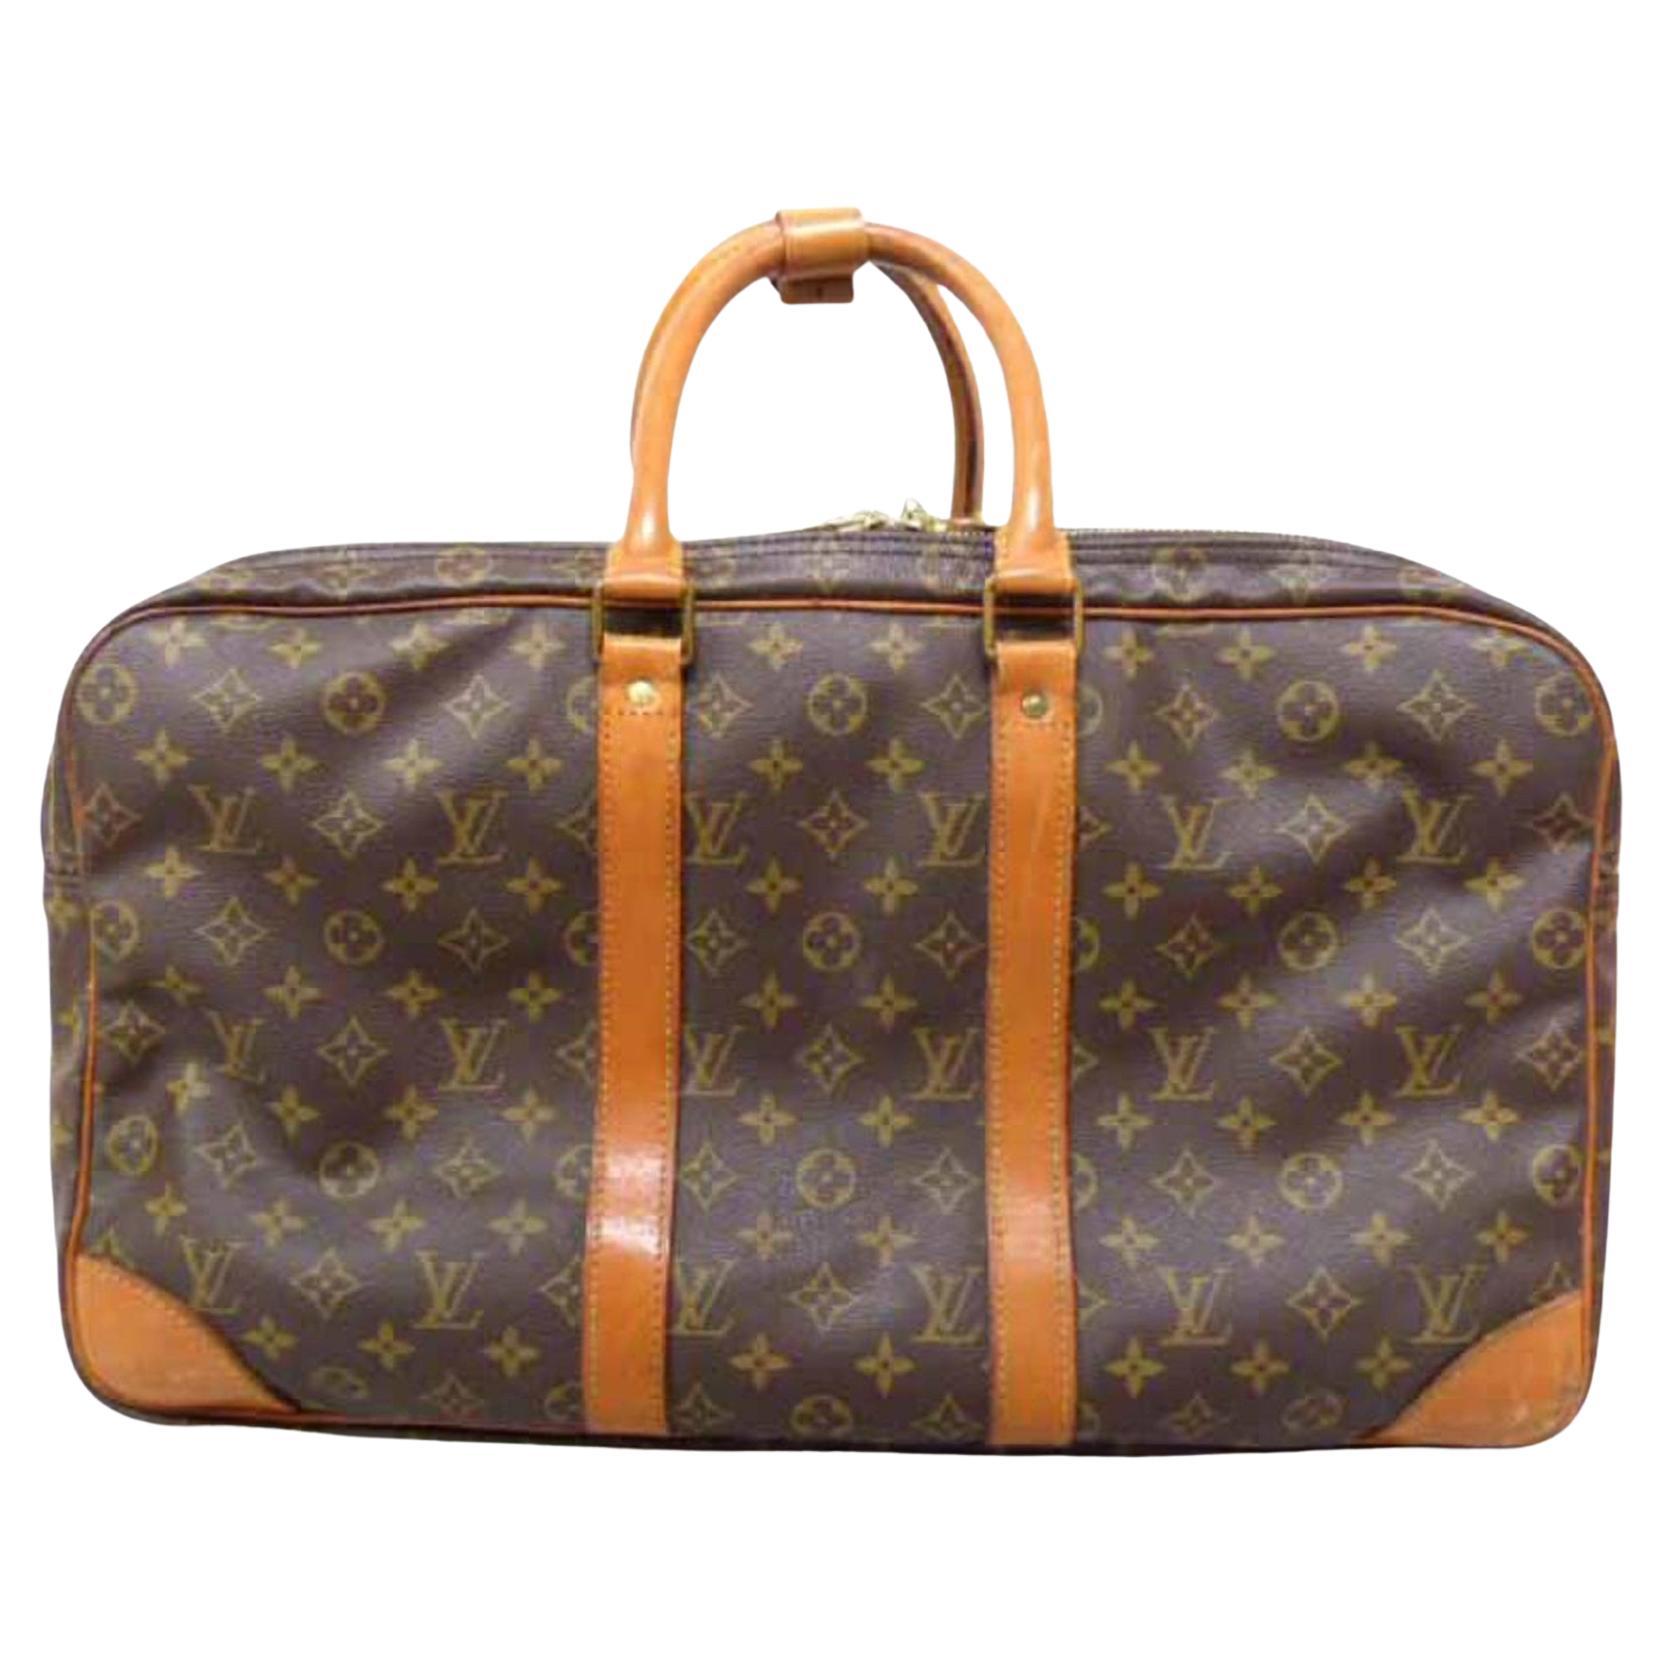 Louis Vuitton Poche Sac Trois 223277 Brown Coated Canvas Weekend/Travel Bag For Sale